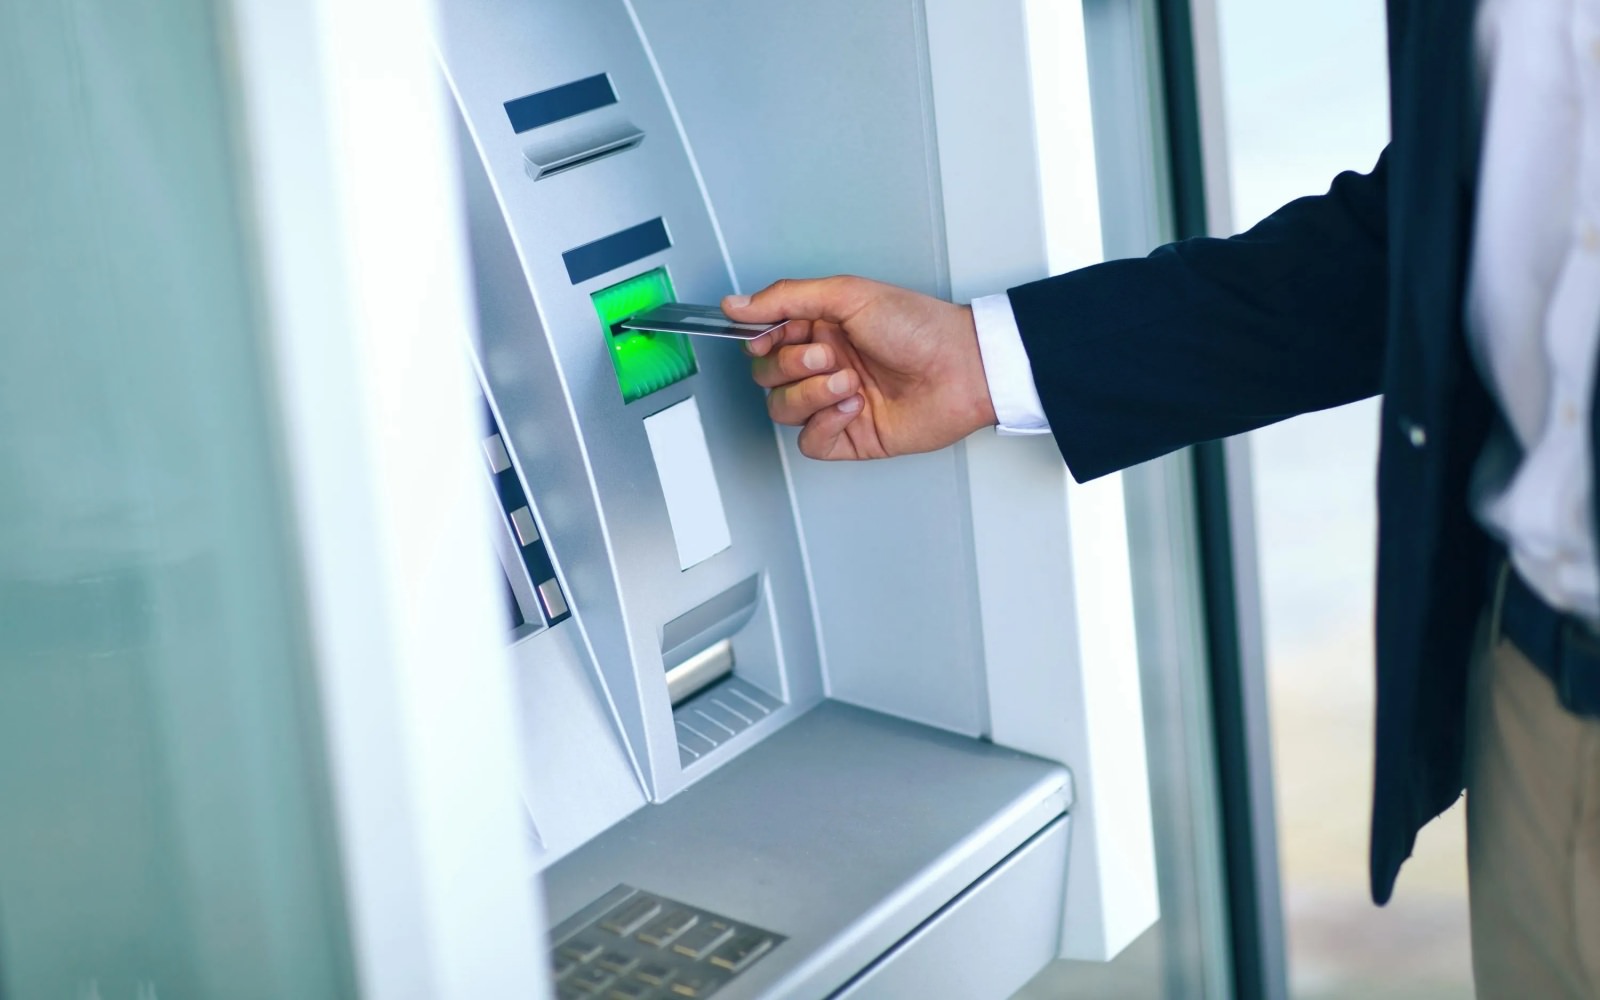 A person inserting their debit card into an ATM